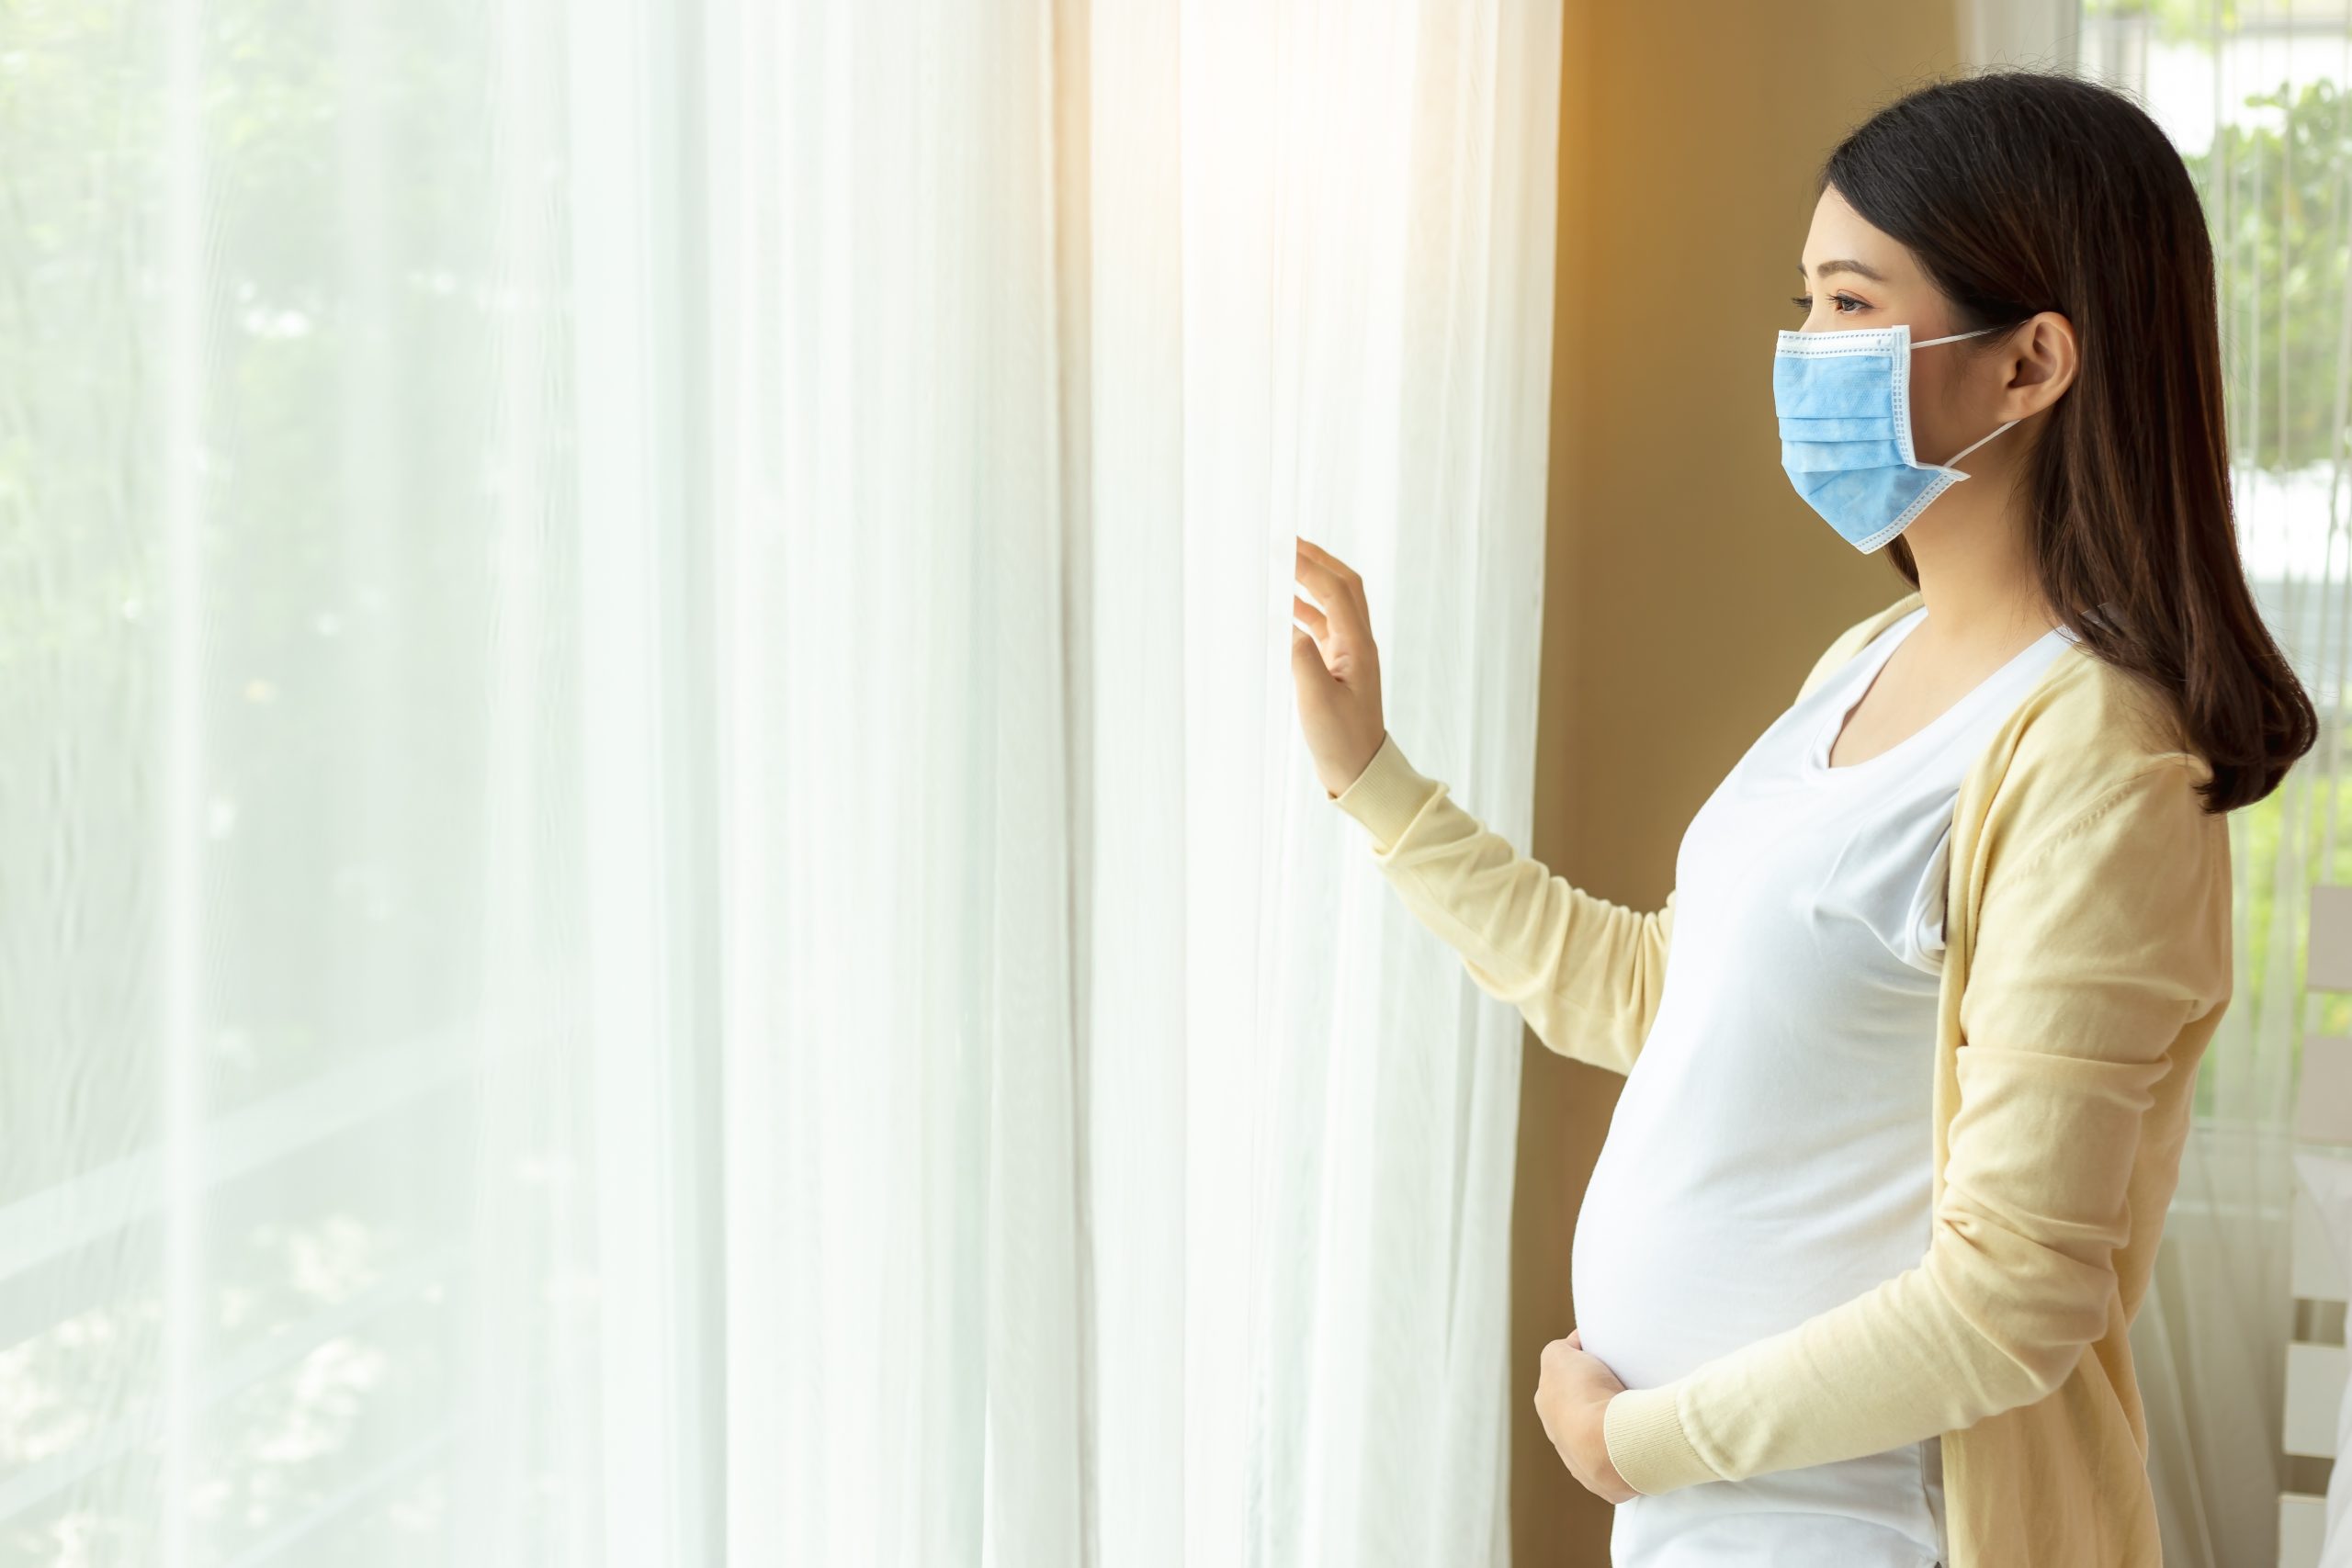 Pandemic babies: Parenting & Pregnancy During COVID-19